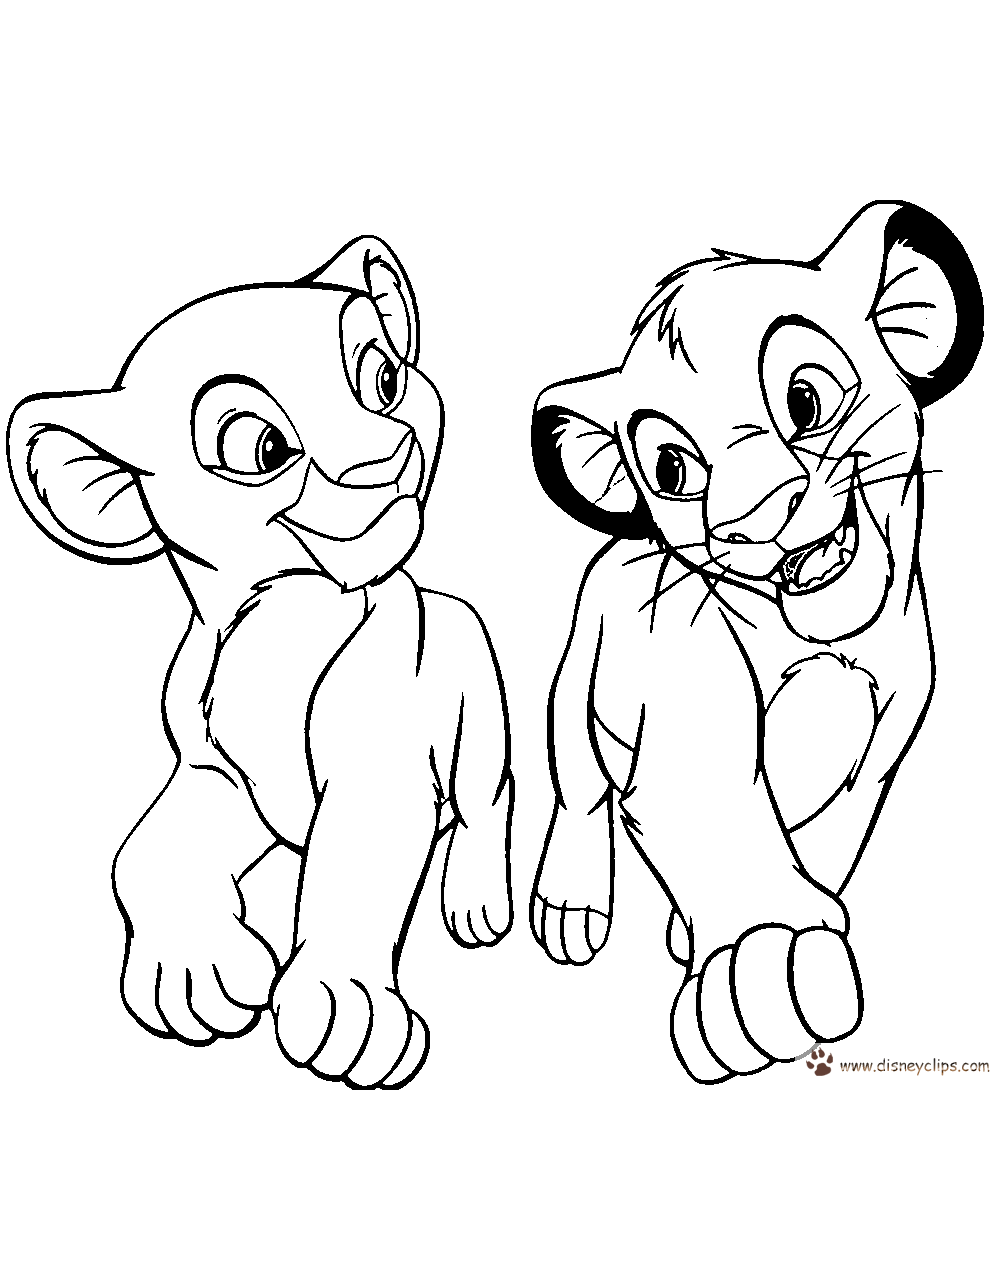 the lion king coloring games the lion king coloring pages disney coloring book coloring king lion games the 